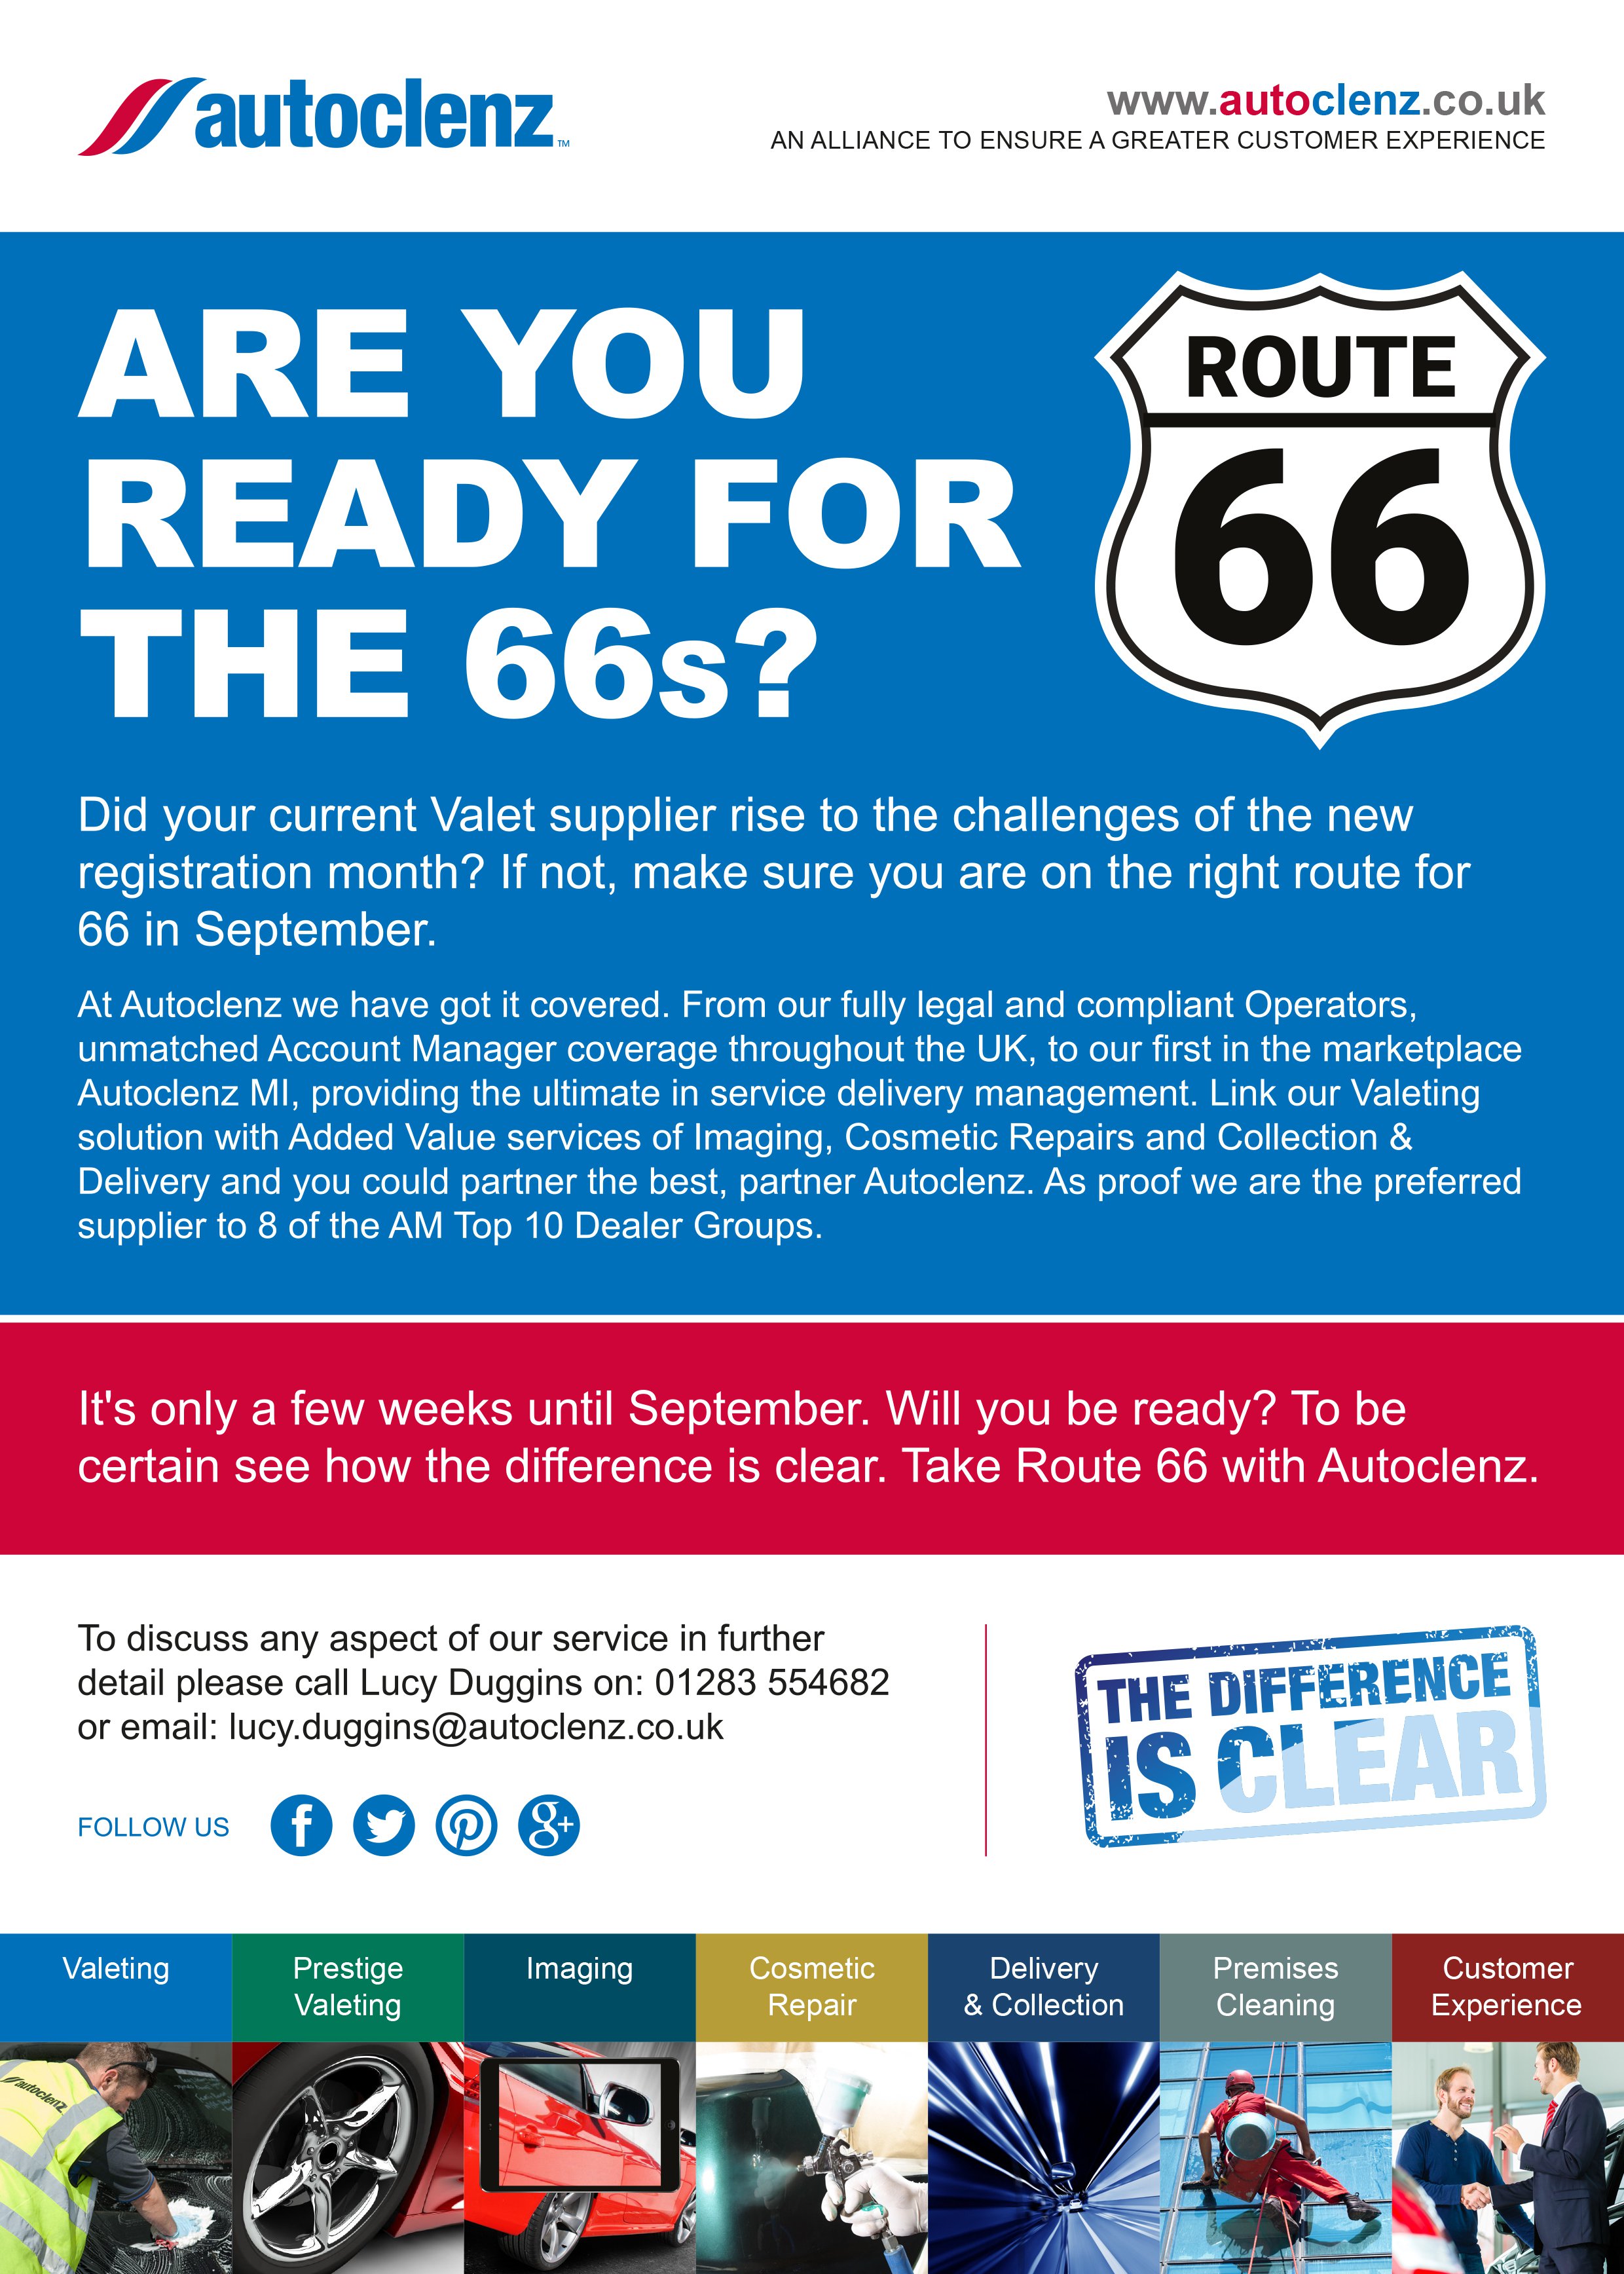 Image:Are you ready for the 66s?